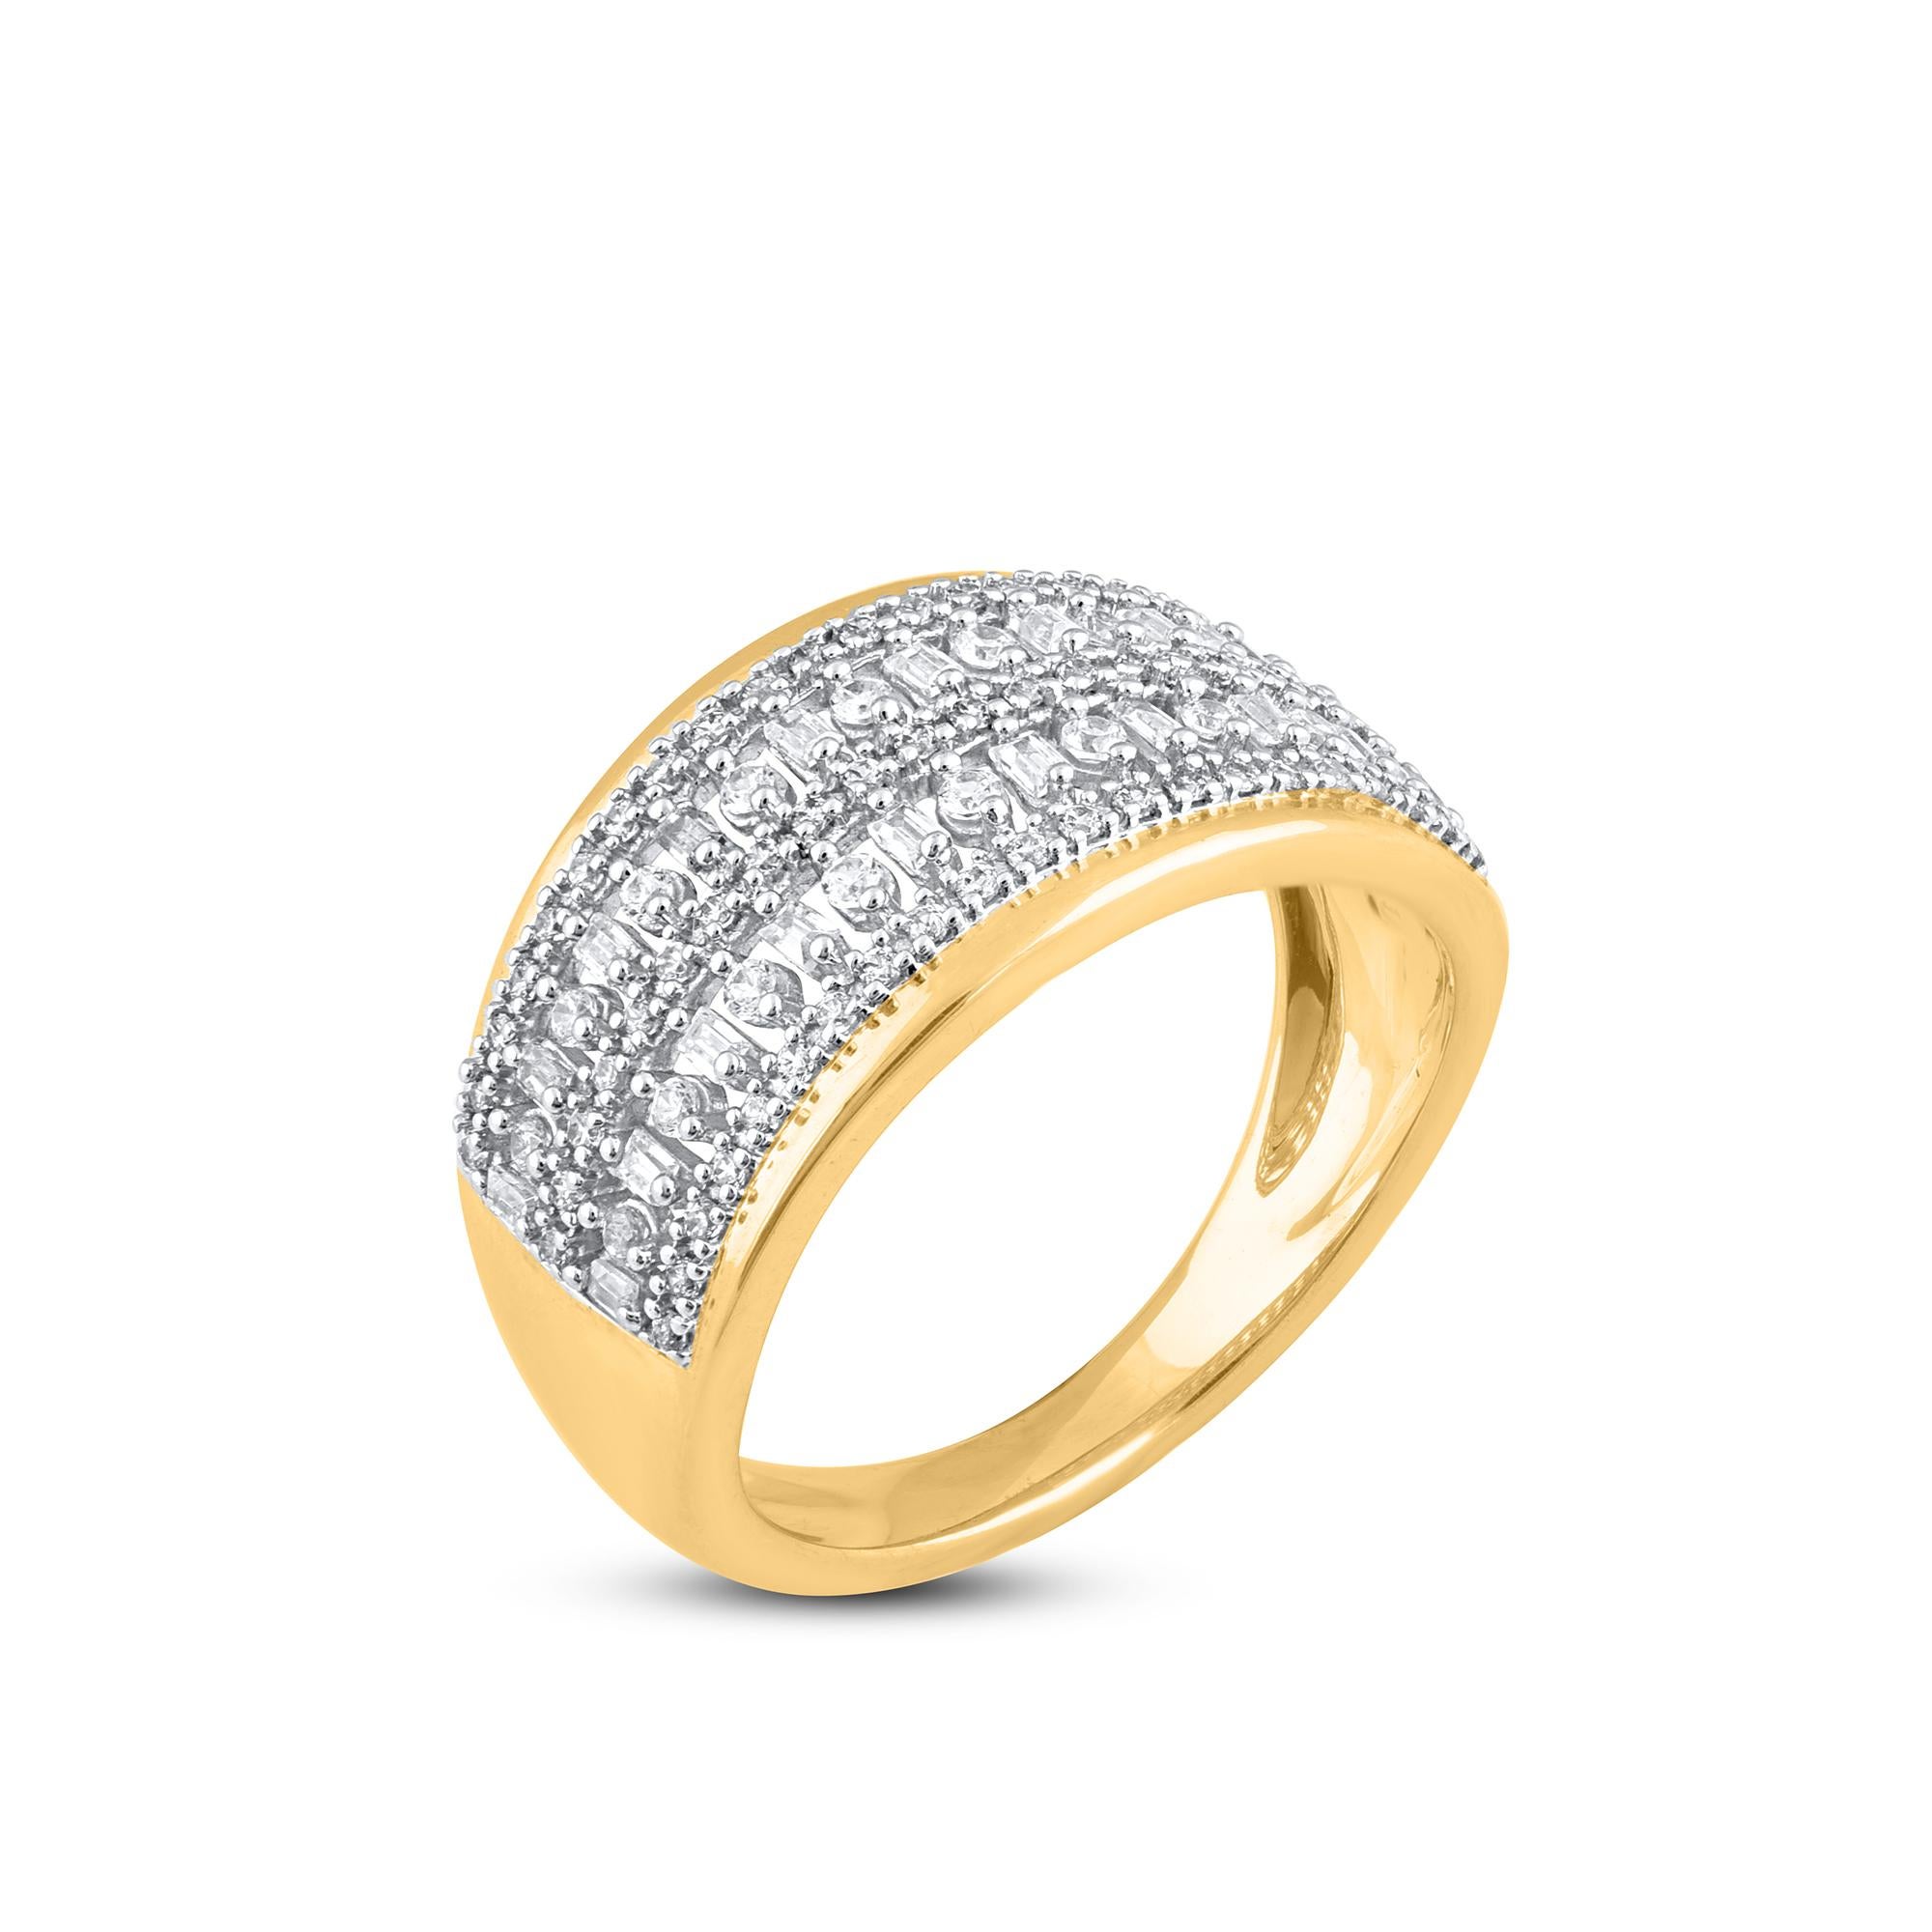 A striking addition when worn on its own, this diamond wedding band makes a stunning impression. The ring is crafted from 14-karat gold in your choice of white, rose, or yellow, and features Round Brilliant 81 and Baguette - 20 white diamonds, Micro